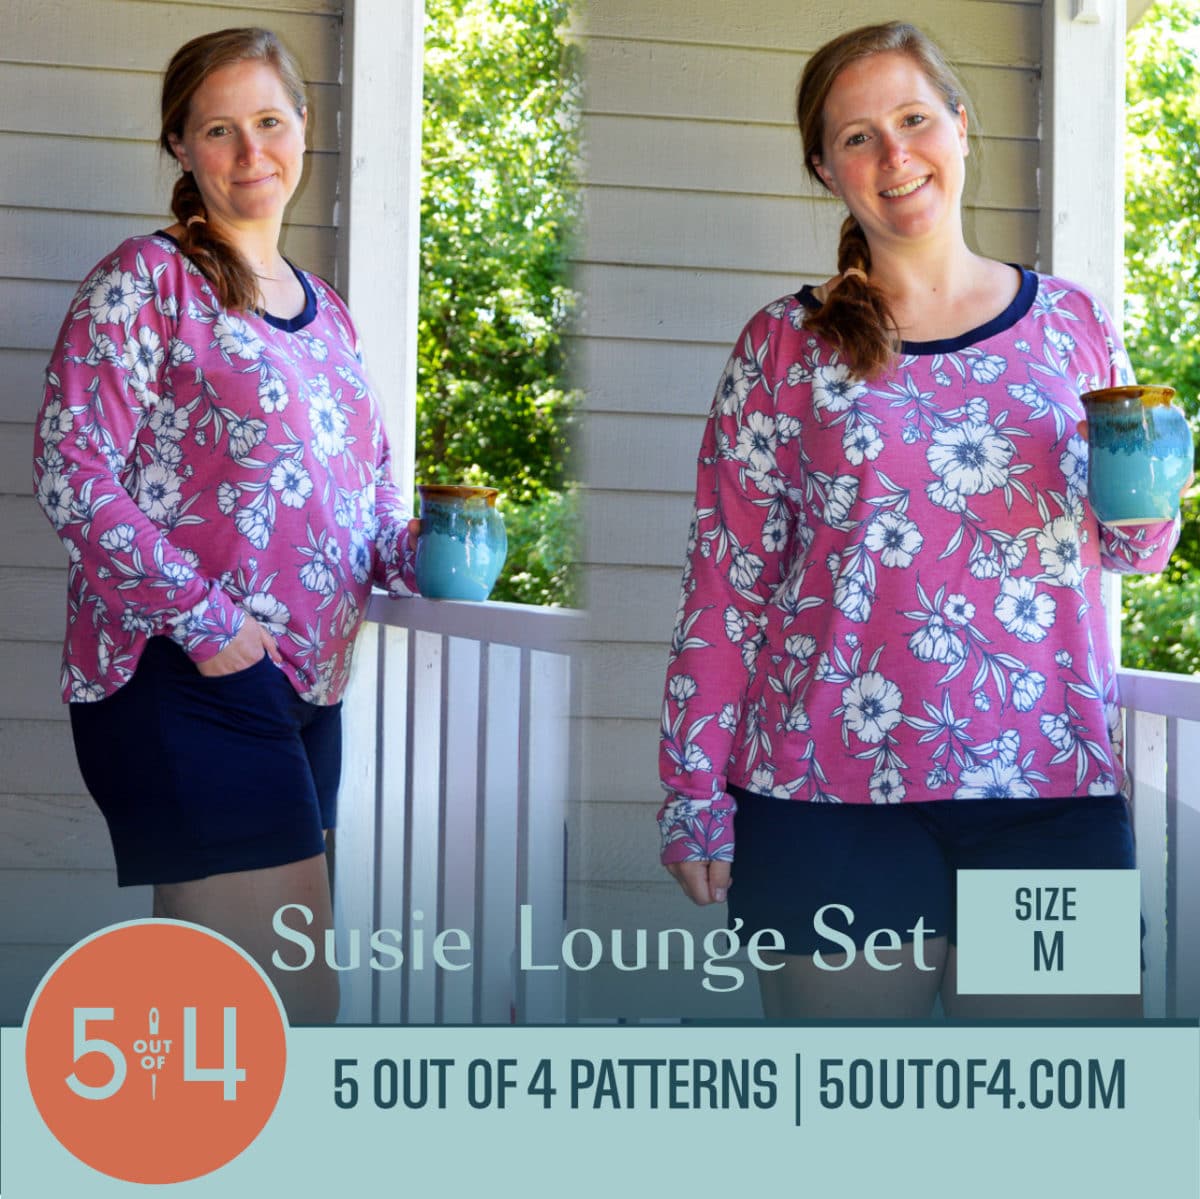 Susie Lounge Set - 5 out of 4 Patterns